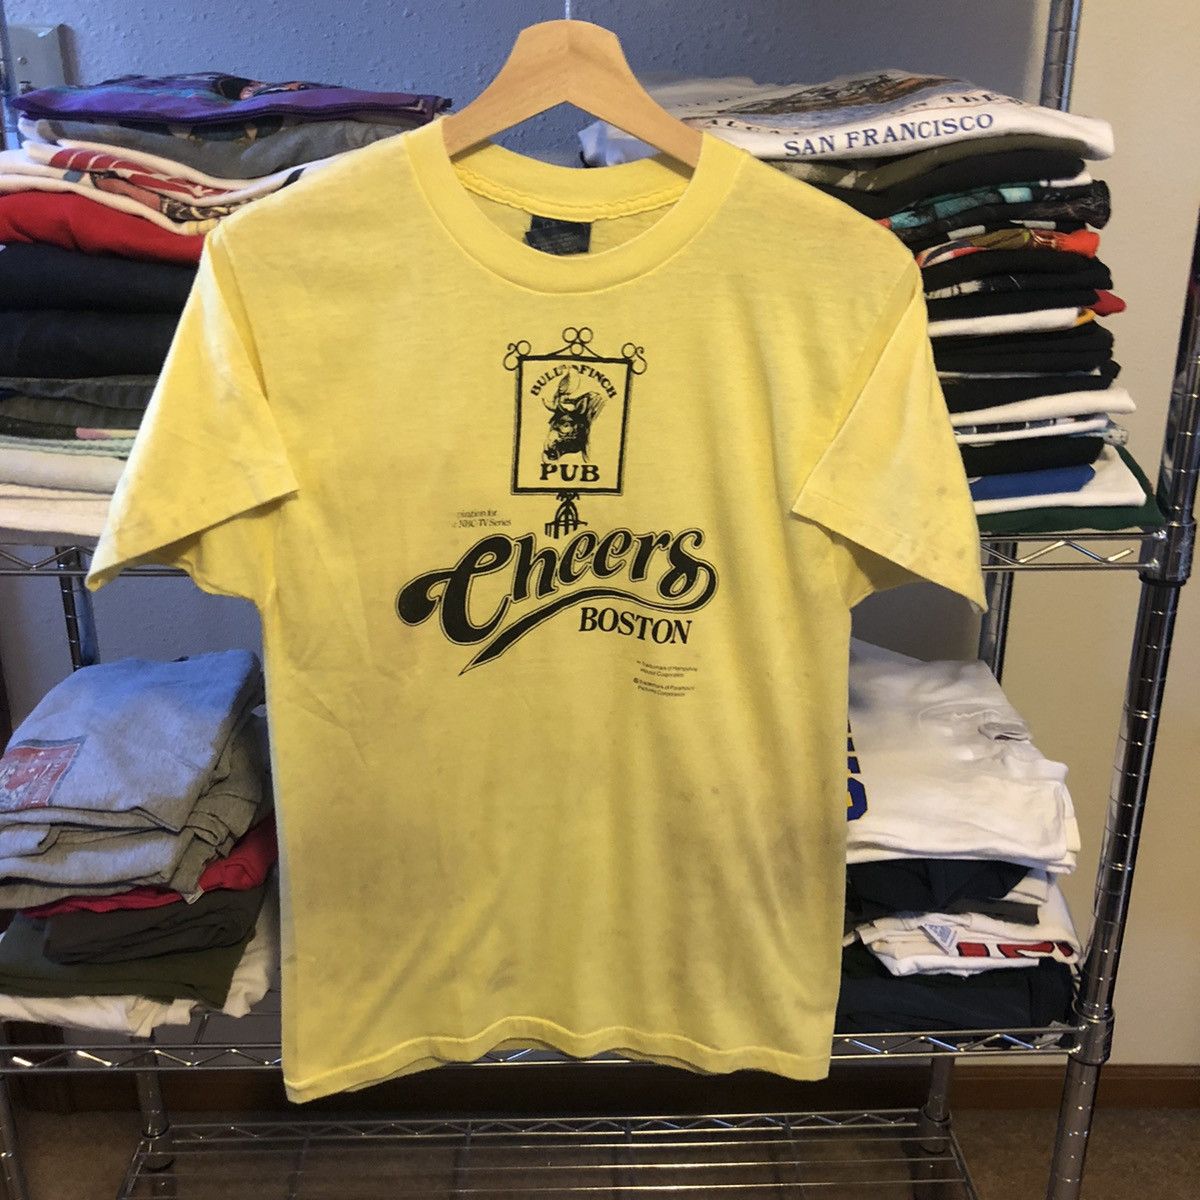 Vintage Vintage 80’s Cheers Bull And Finch Pub tee Size US S / EU 44-46 / 1 - 1 Preview